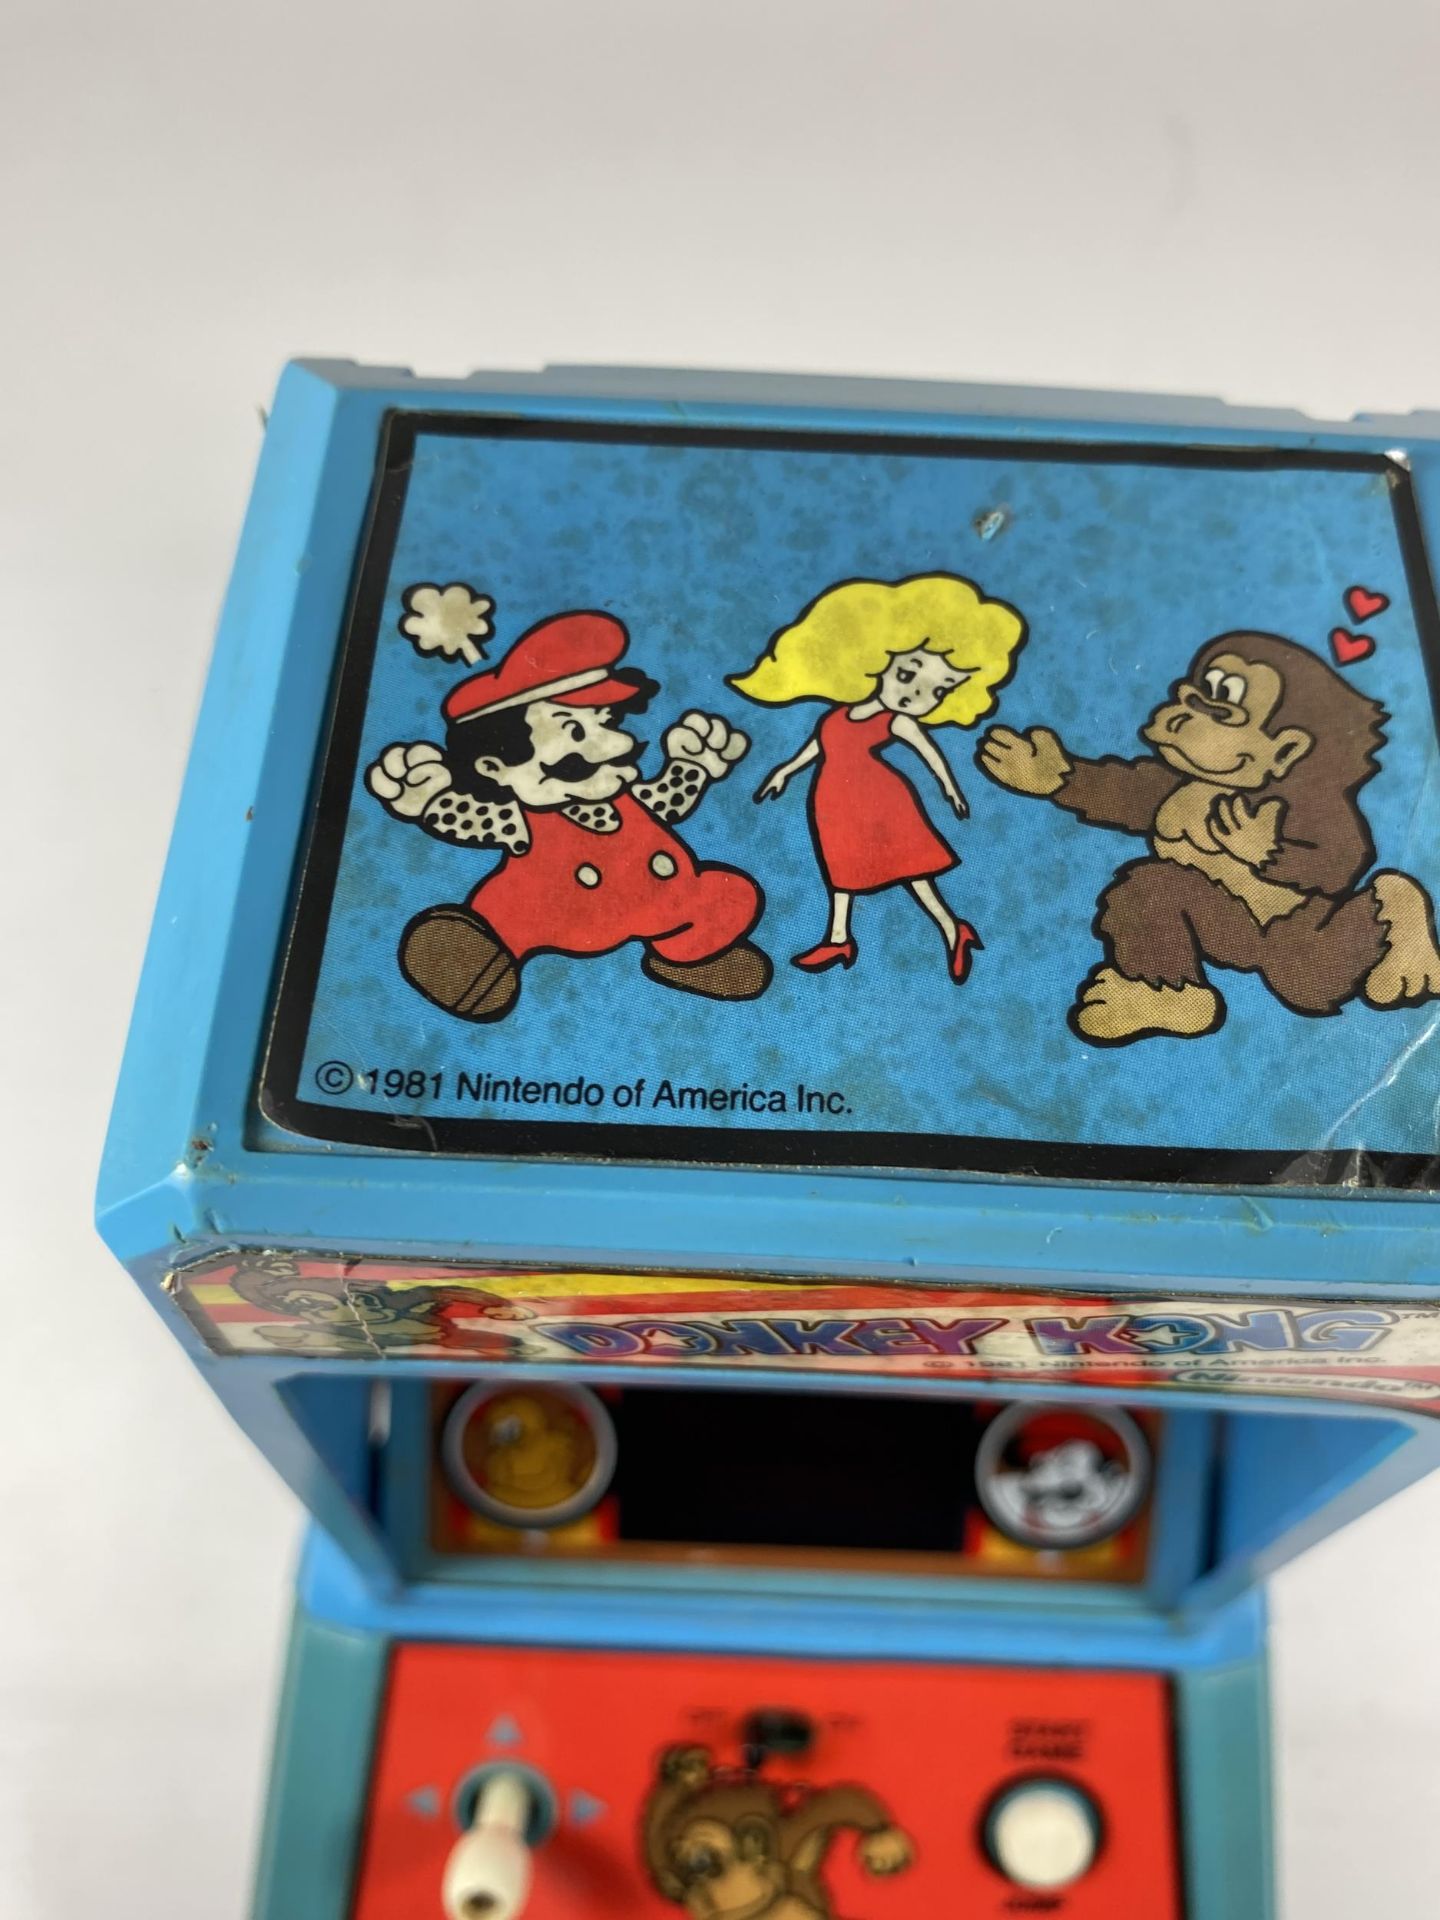 A RETRO 1981 COLECO DONKEY KONG TABLE TOP ARCADE GAME - Image 6 of 6